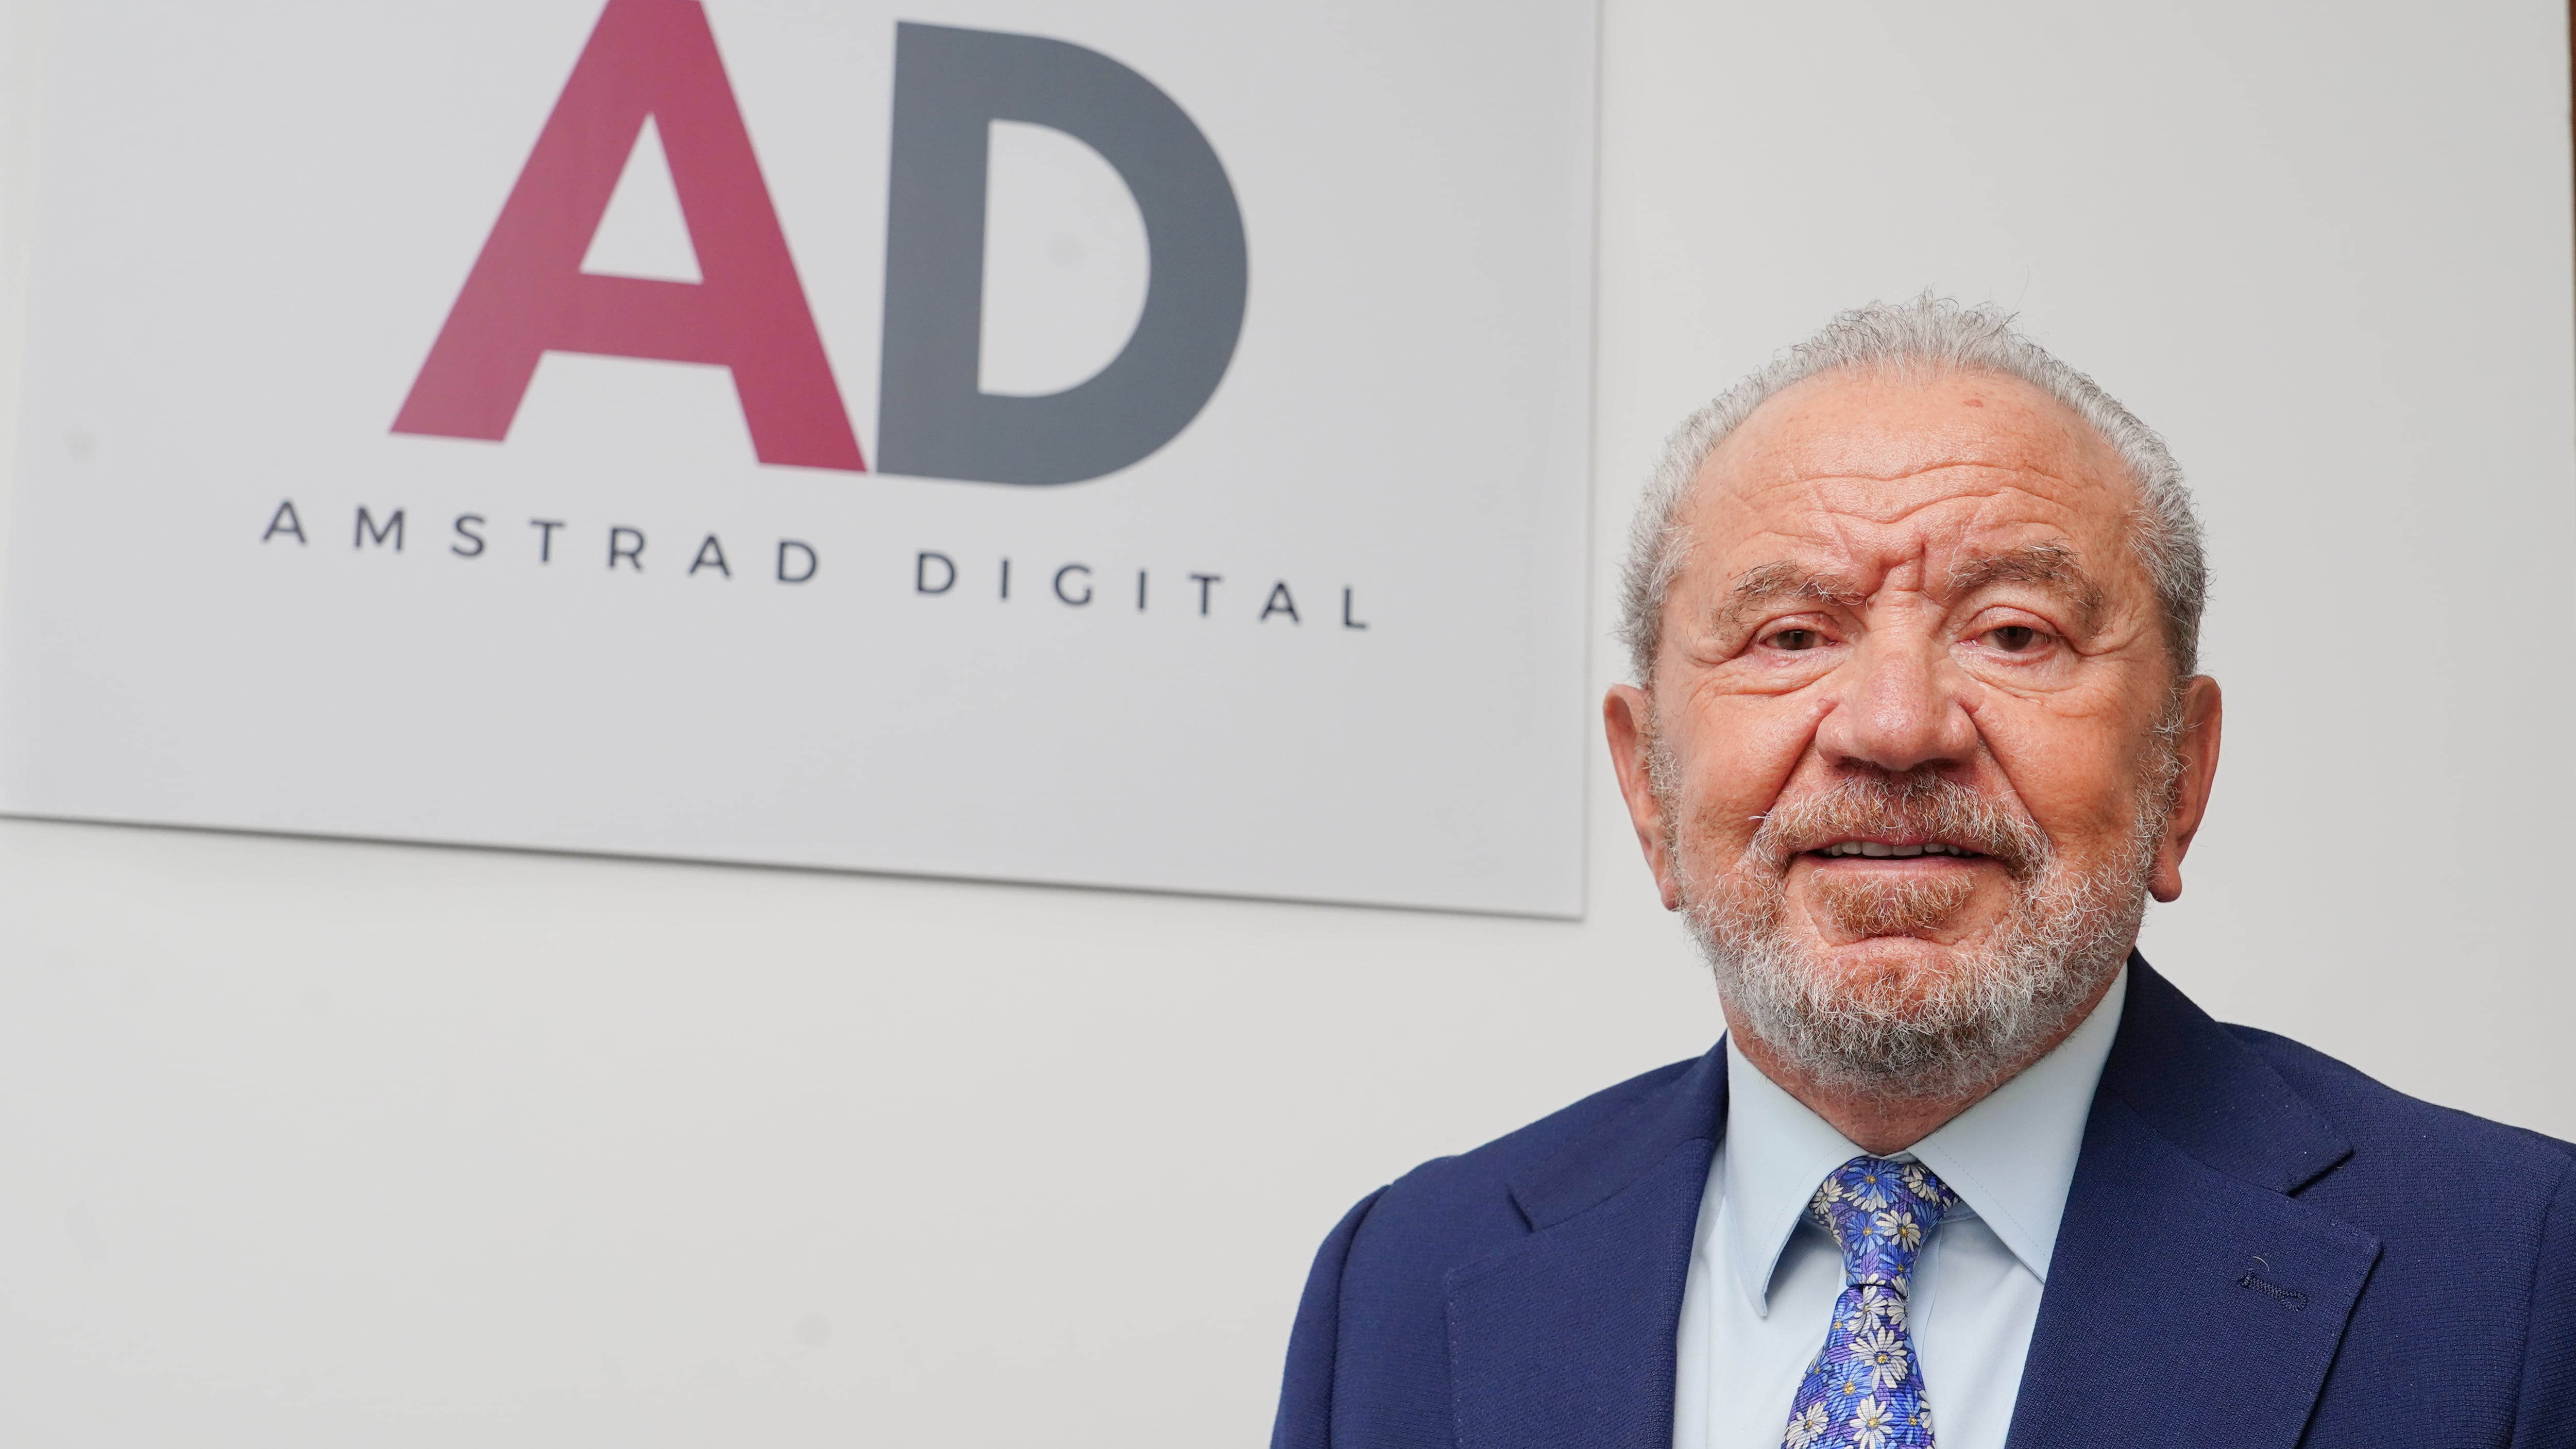 Lord Sugar has thanked Essex Police for their investigation into a serial burglar’s crimes